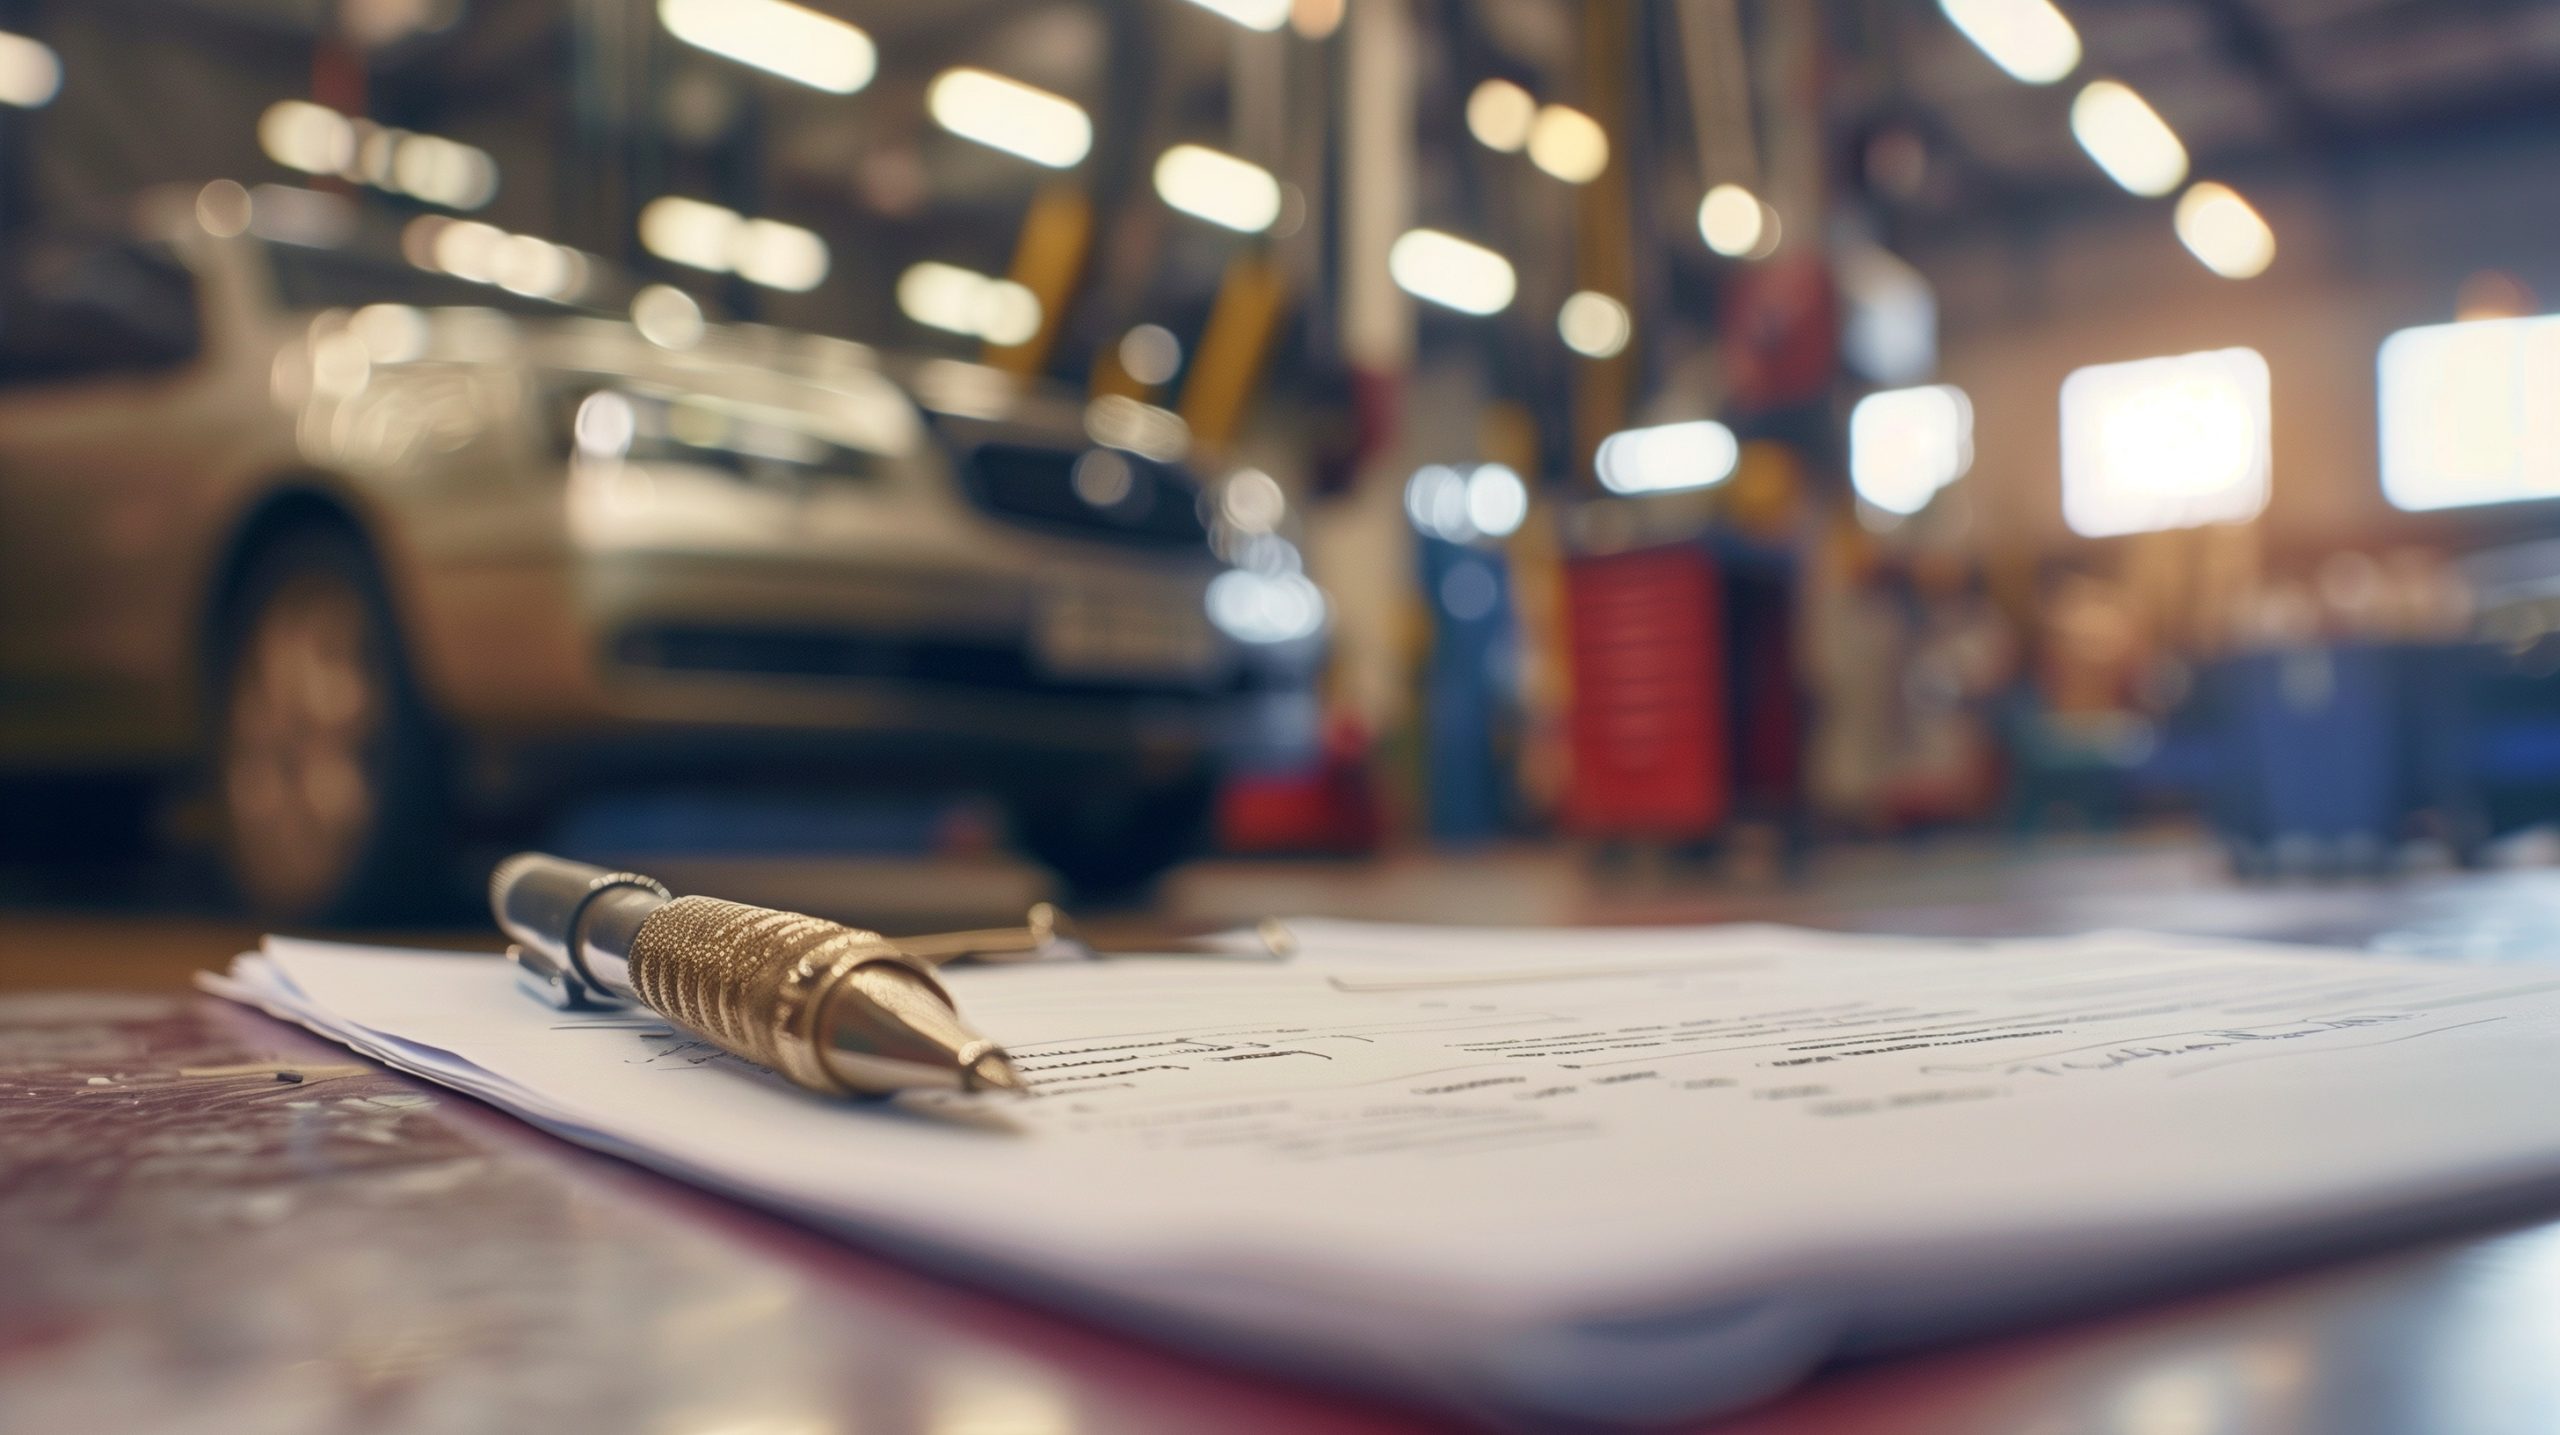 A close-up of a pen and documents related to insurance claims on a workbench in an auto repair shop, with a blurred background showing a car hoisted for service and tools hanging.